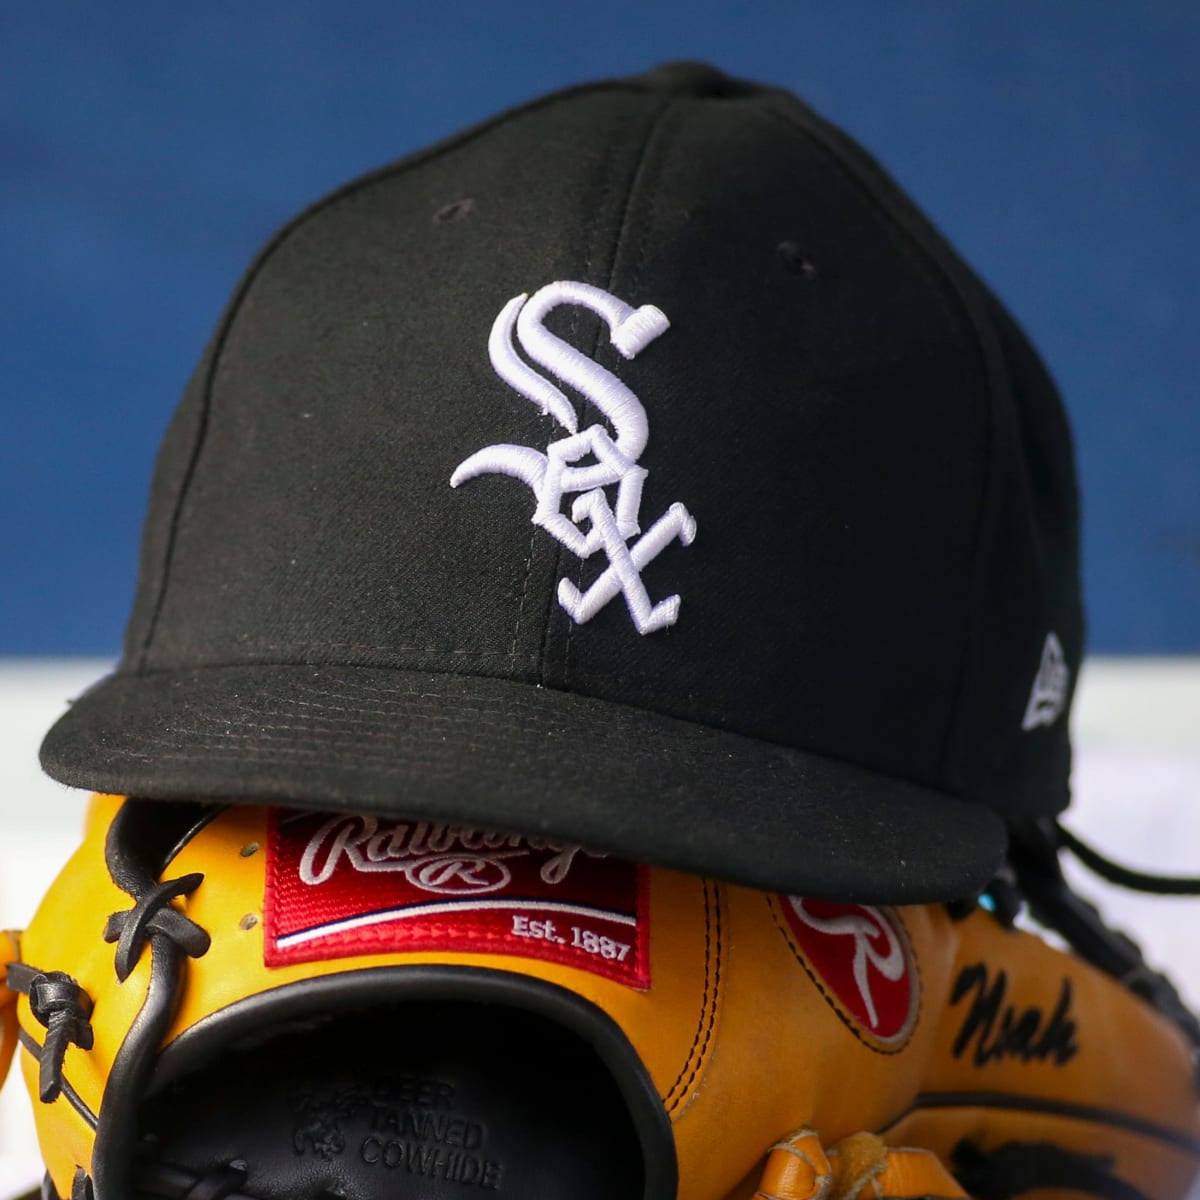 Tributes pour in after White Sox play-by-play man Ed Farmer's death -  Chicago Baseball Museum